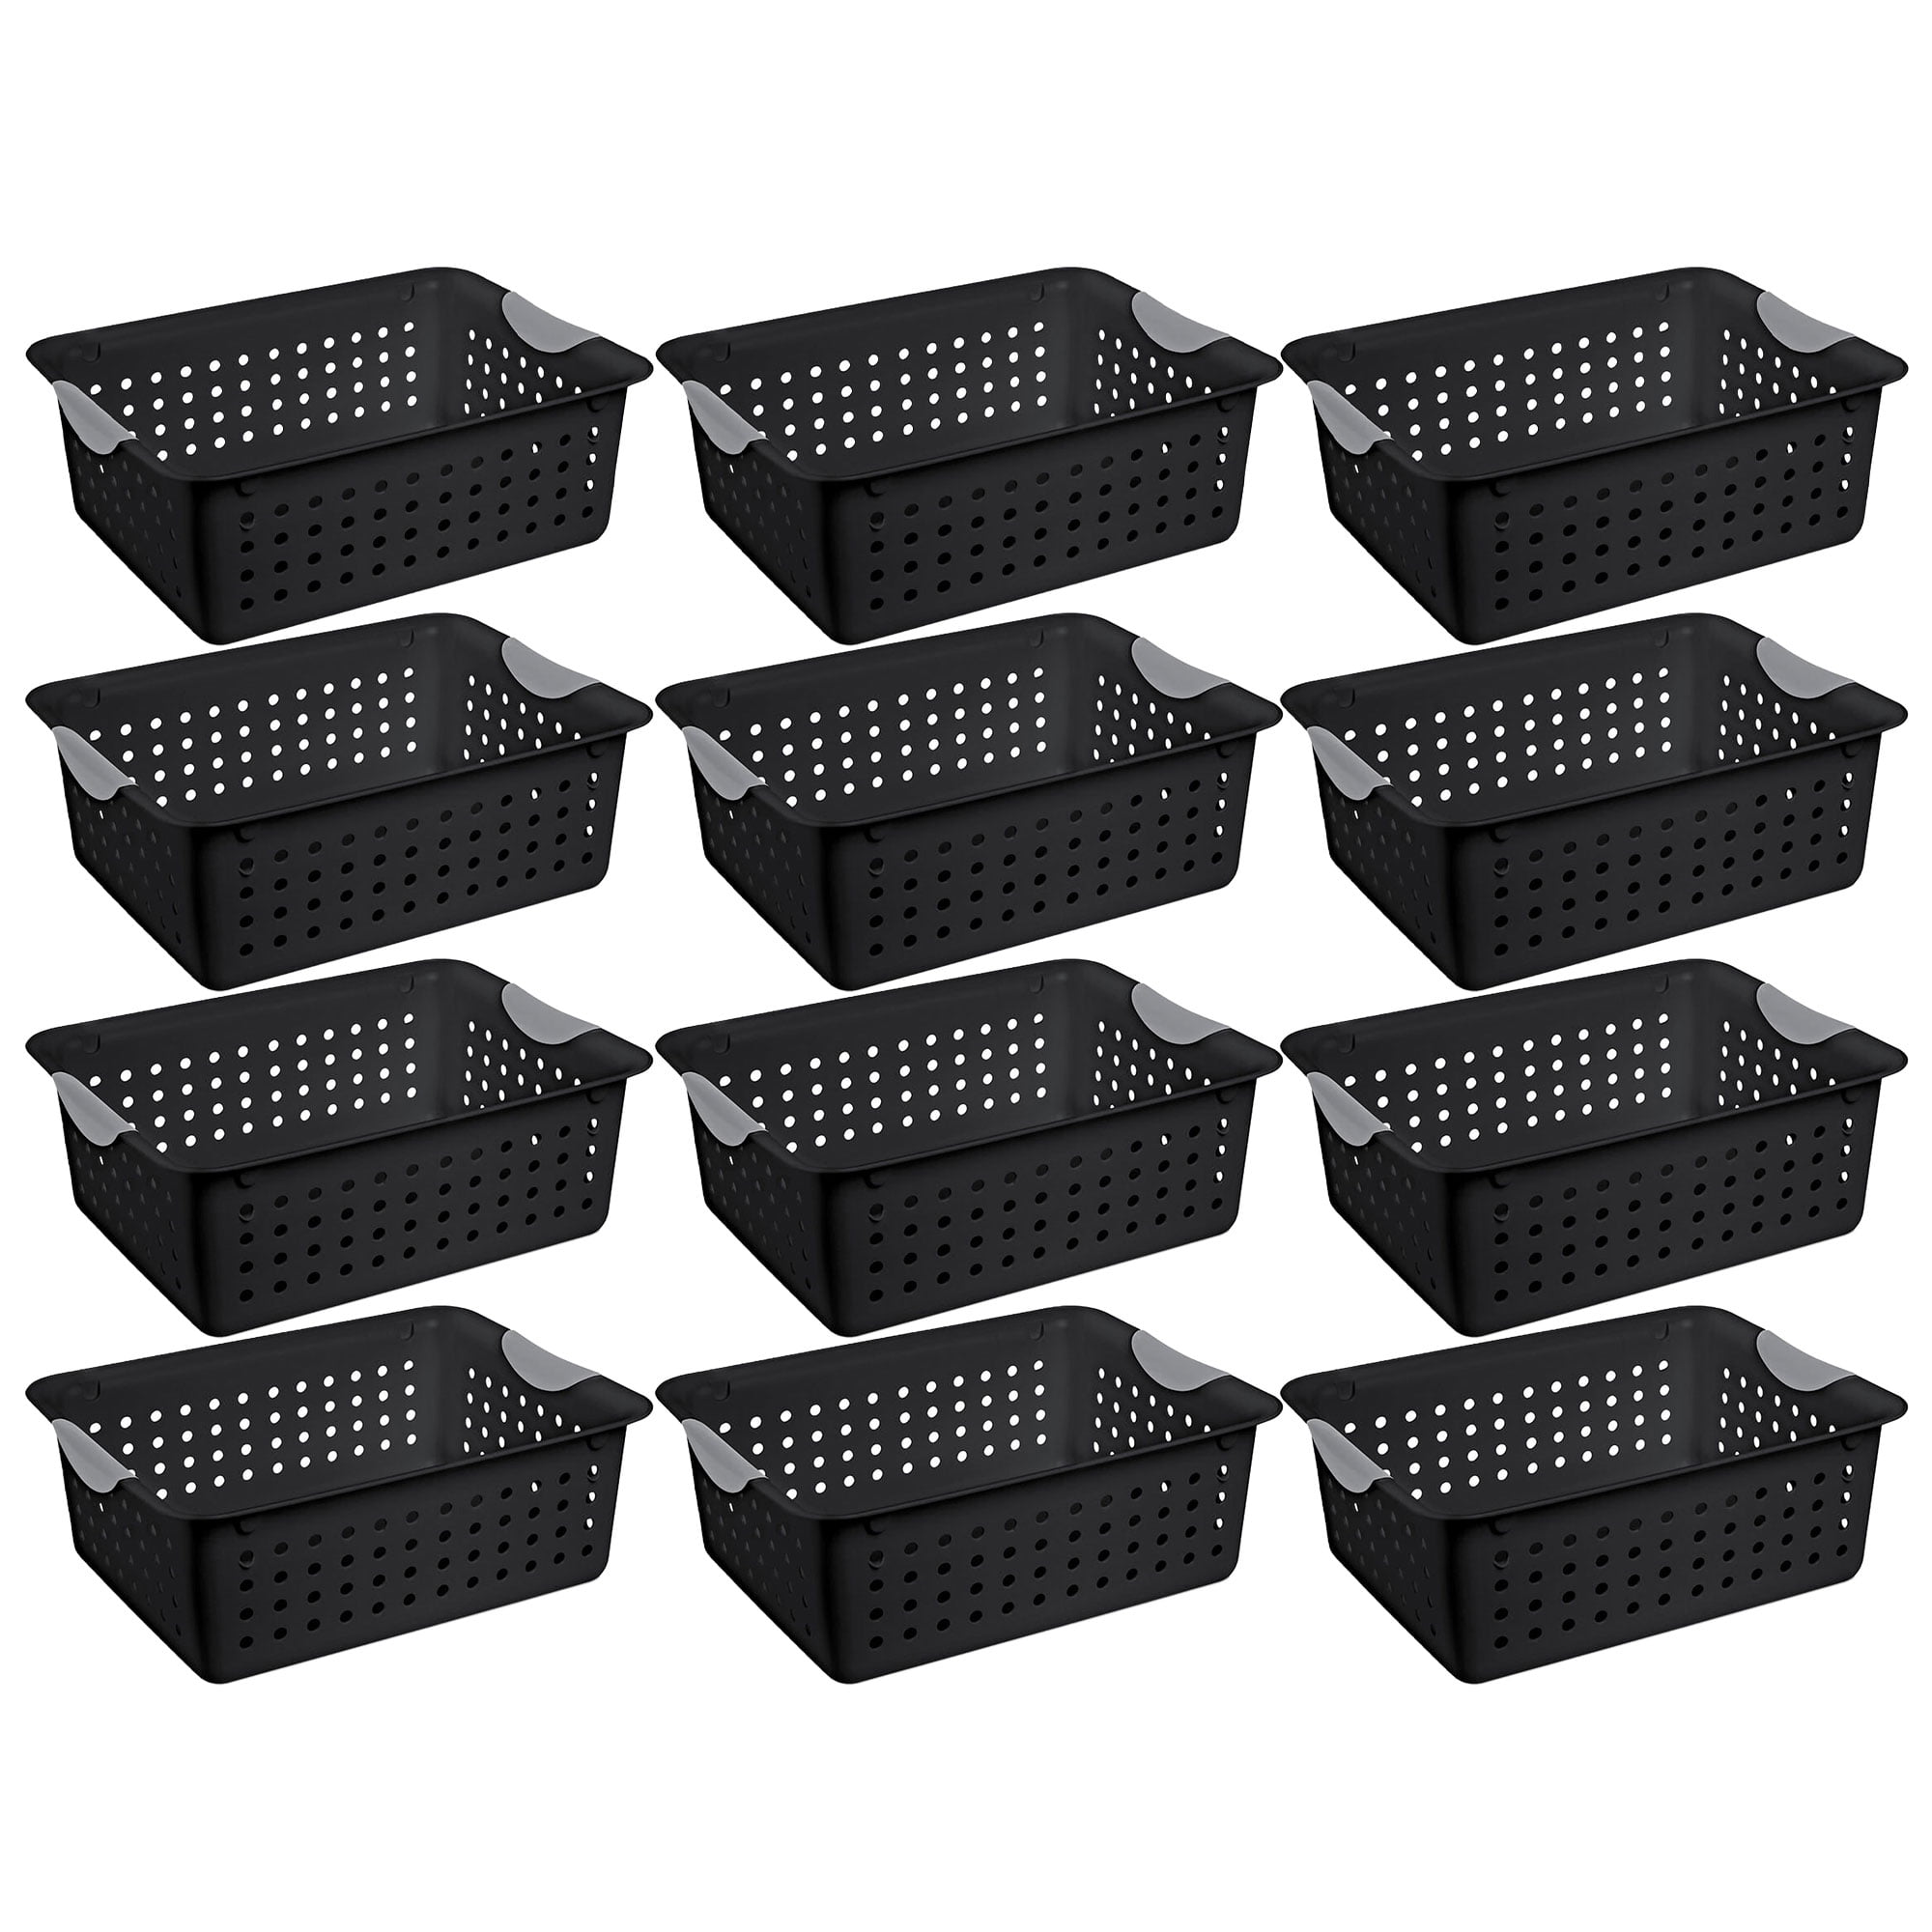 funky gadgets Set of 10 Plastic Handy Storage Basket Pharmacy,Tool,Files,Fruits Tidy Holder Home,Office,Kitchen,School Organizer Racks Clear/Natural Basket, 25 cm Small